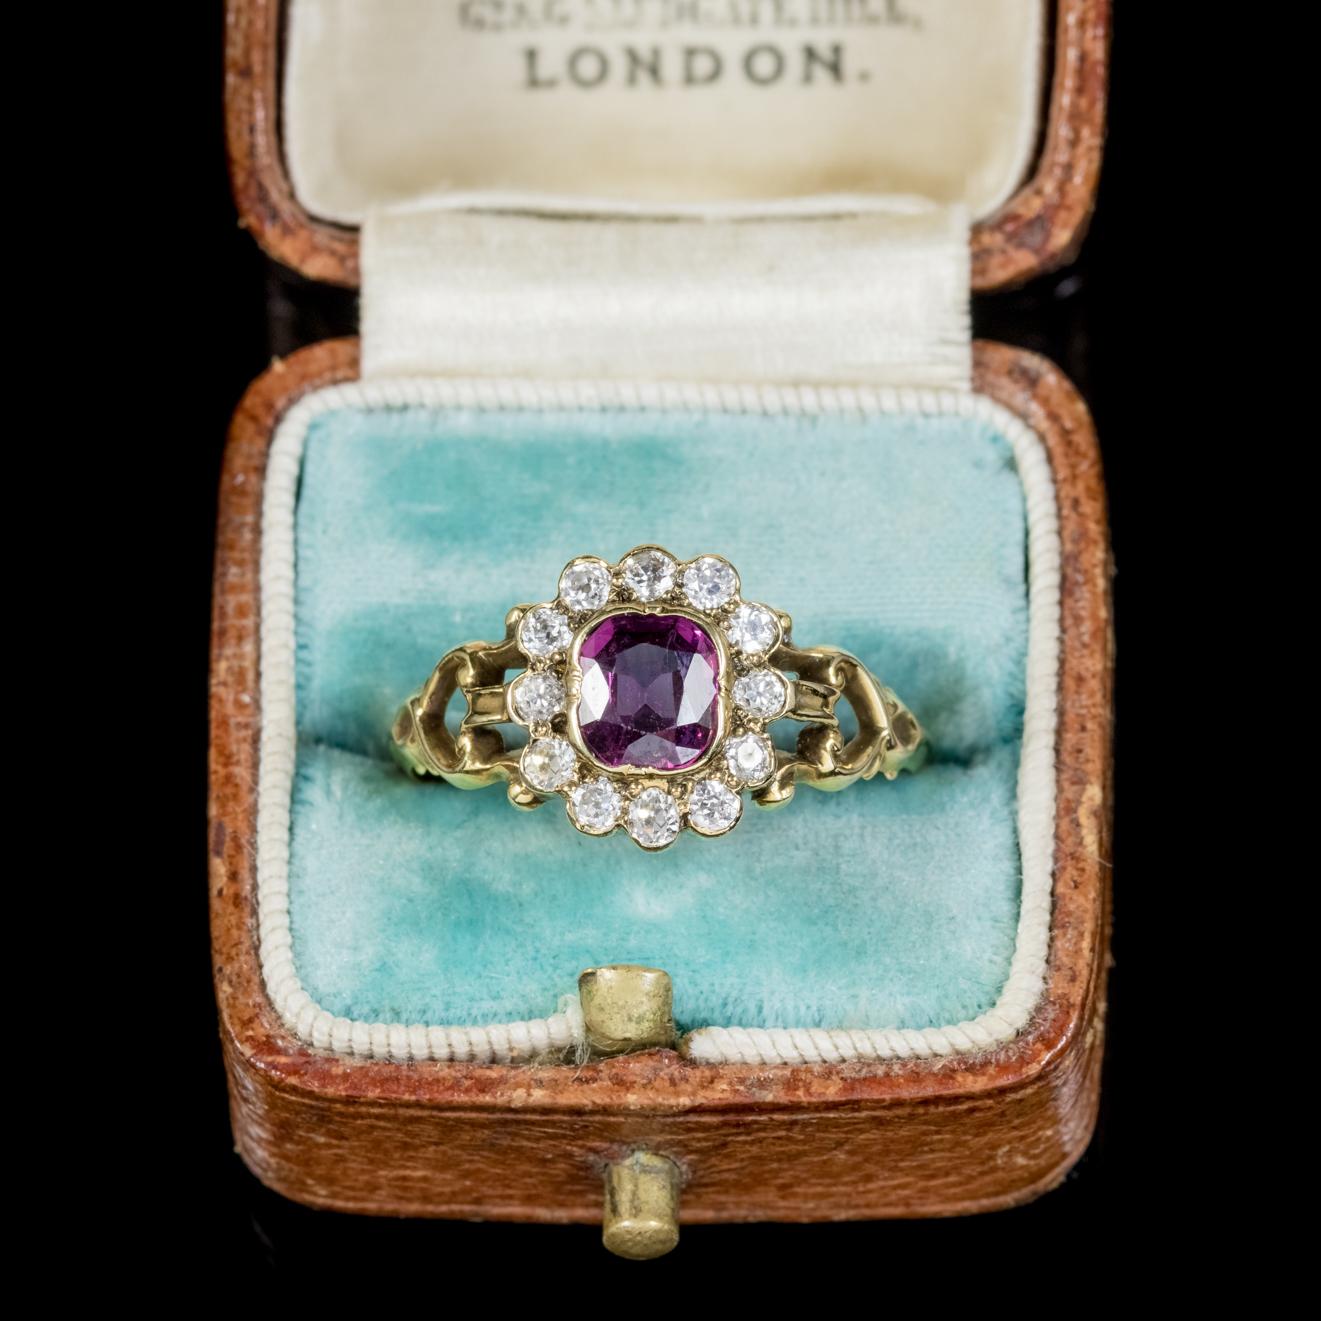 Antique French Victorian Amethyst Diamond Cluster Ring 18 Carat Gold, circa 1860 2